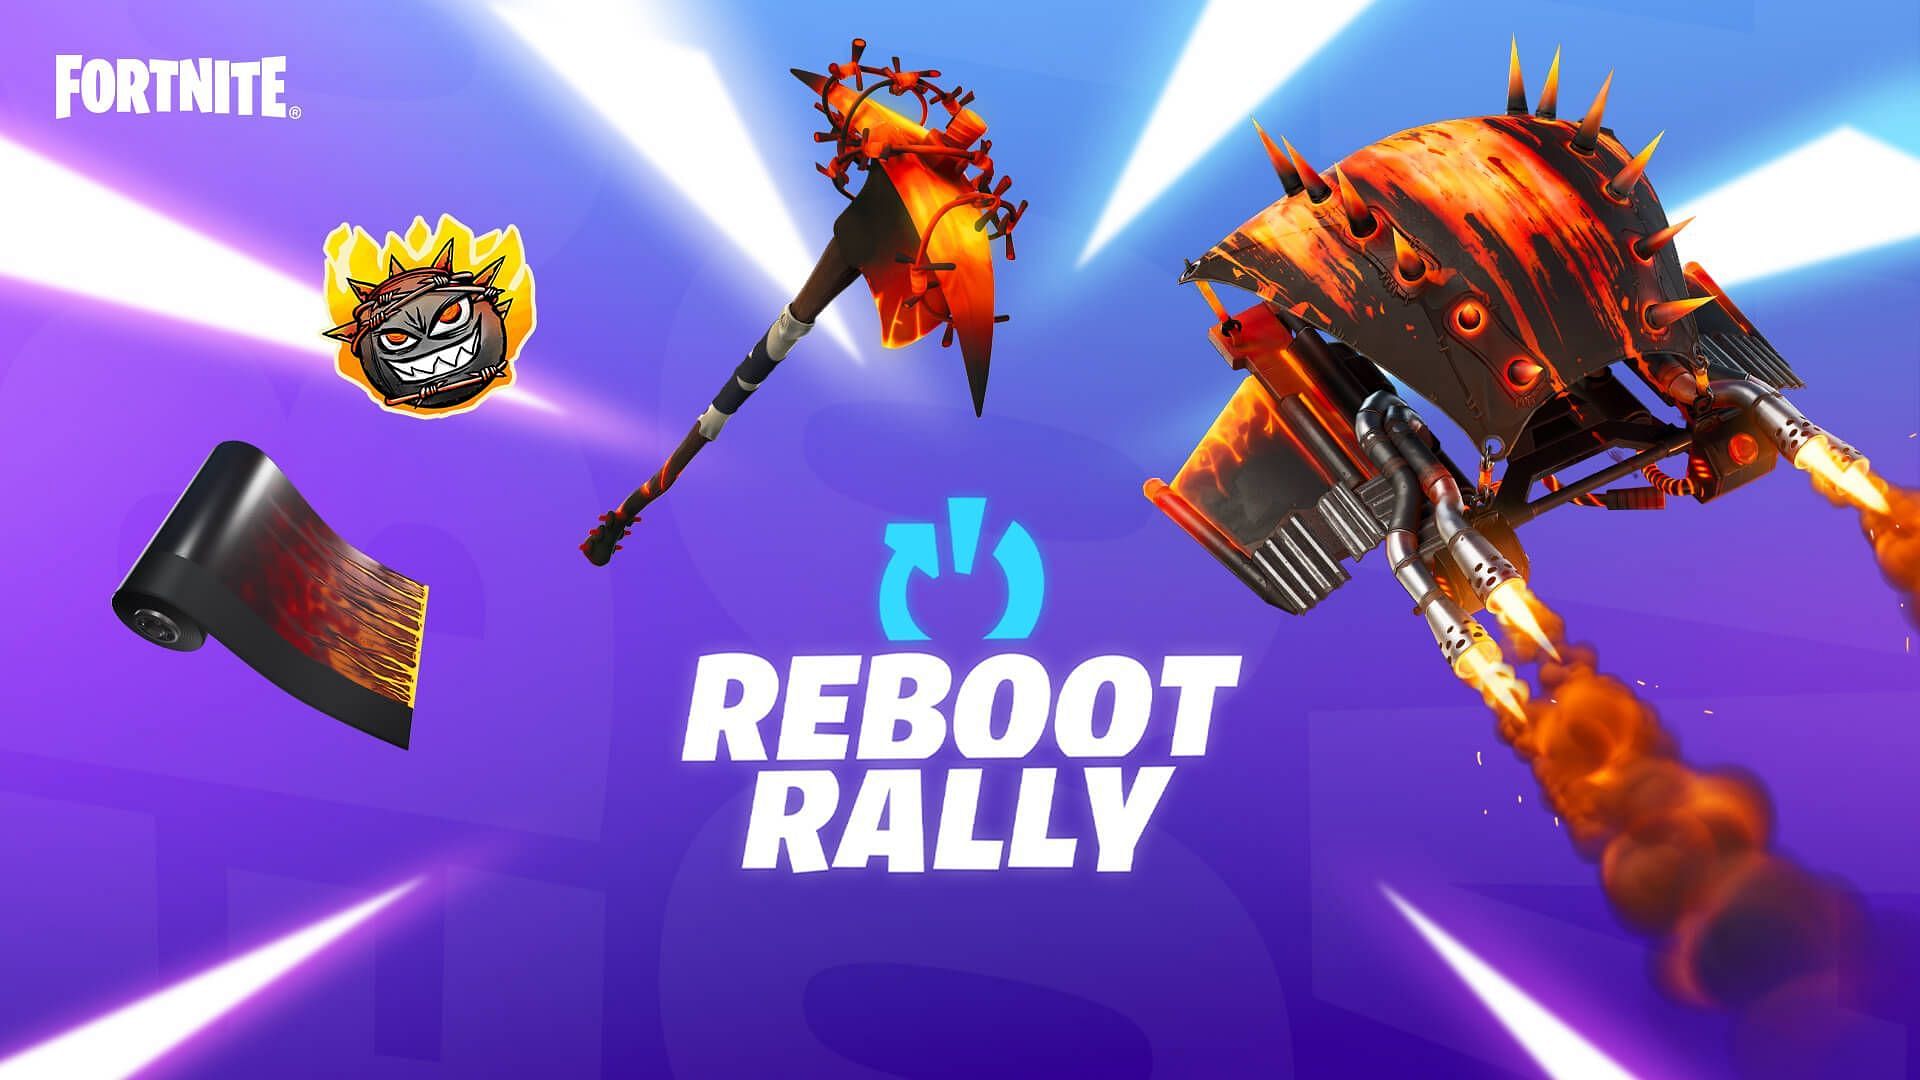 Free Fortnite rewards will be added with the new Reboot Rally program (Image via Epic Games)